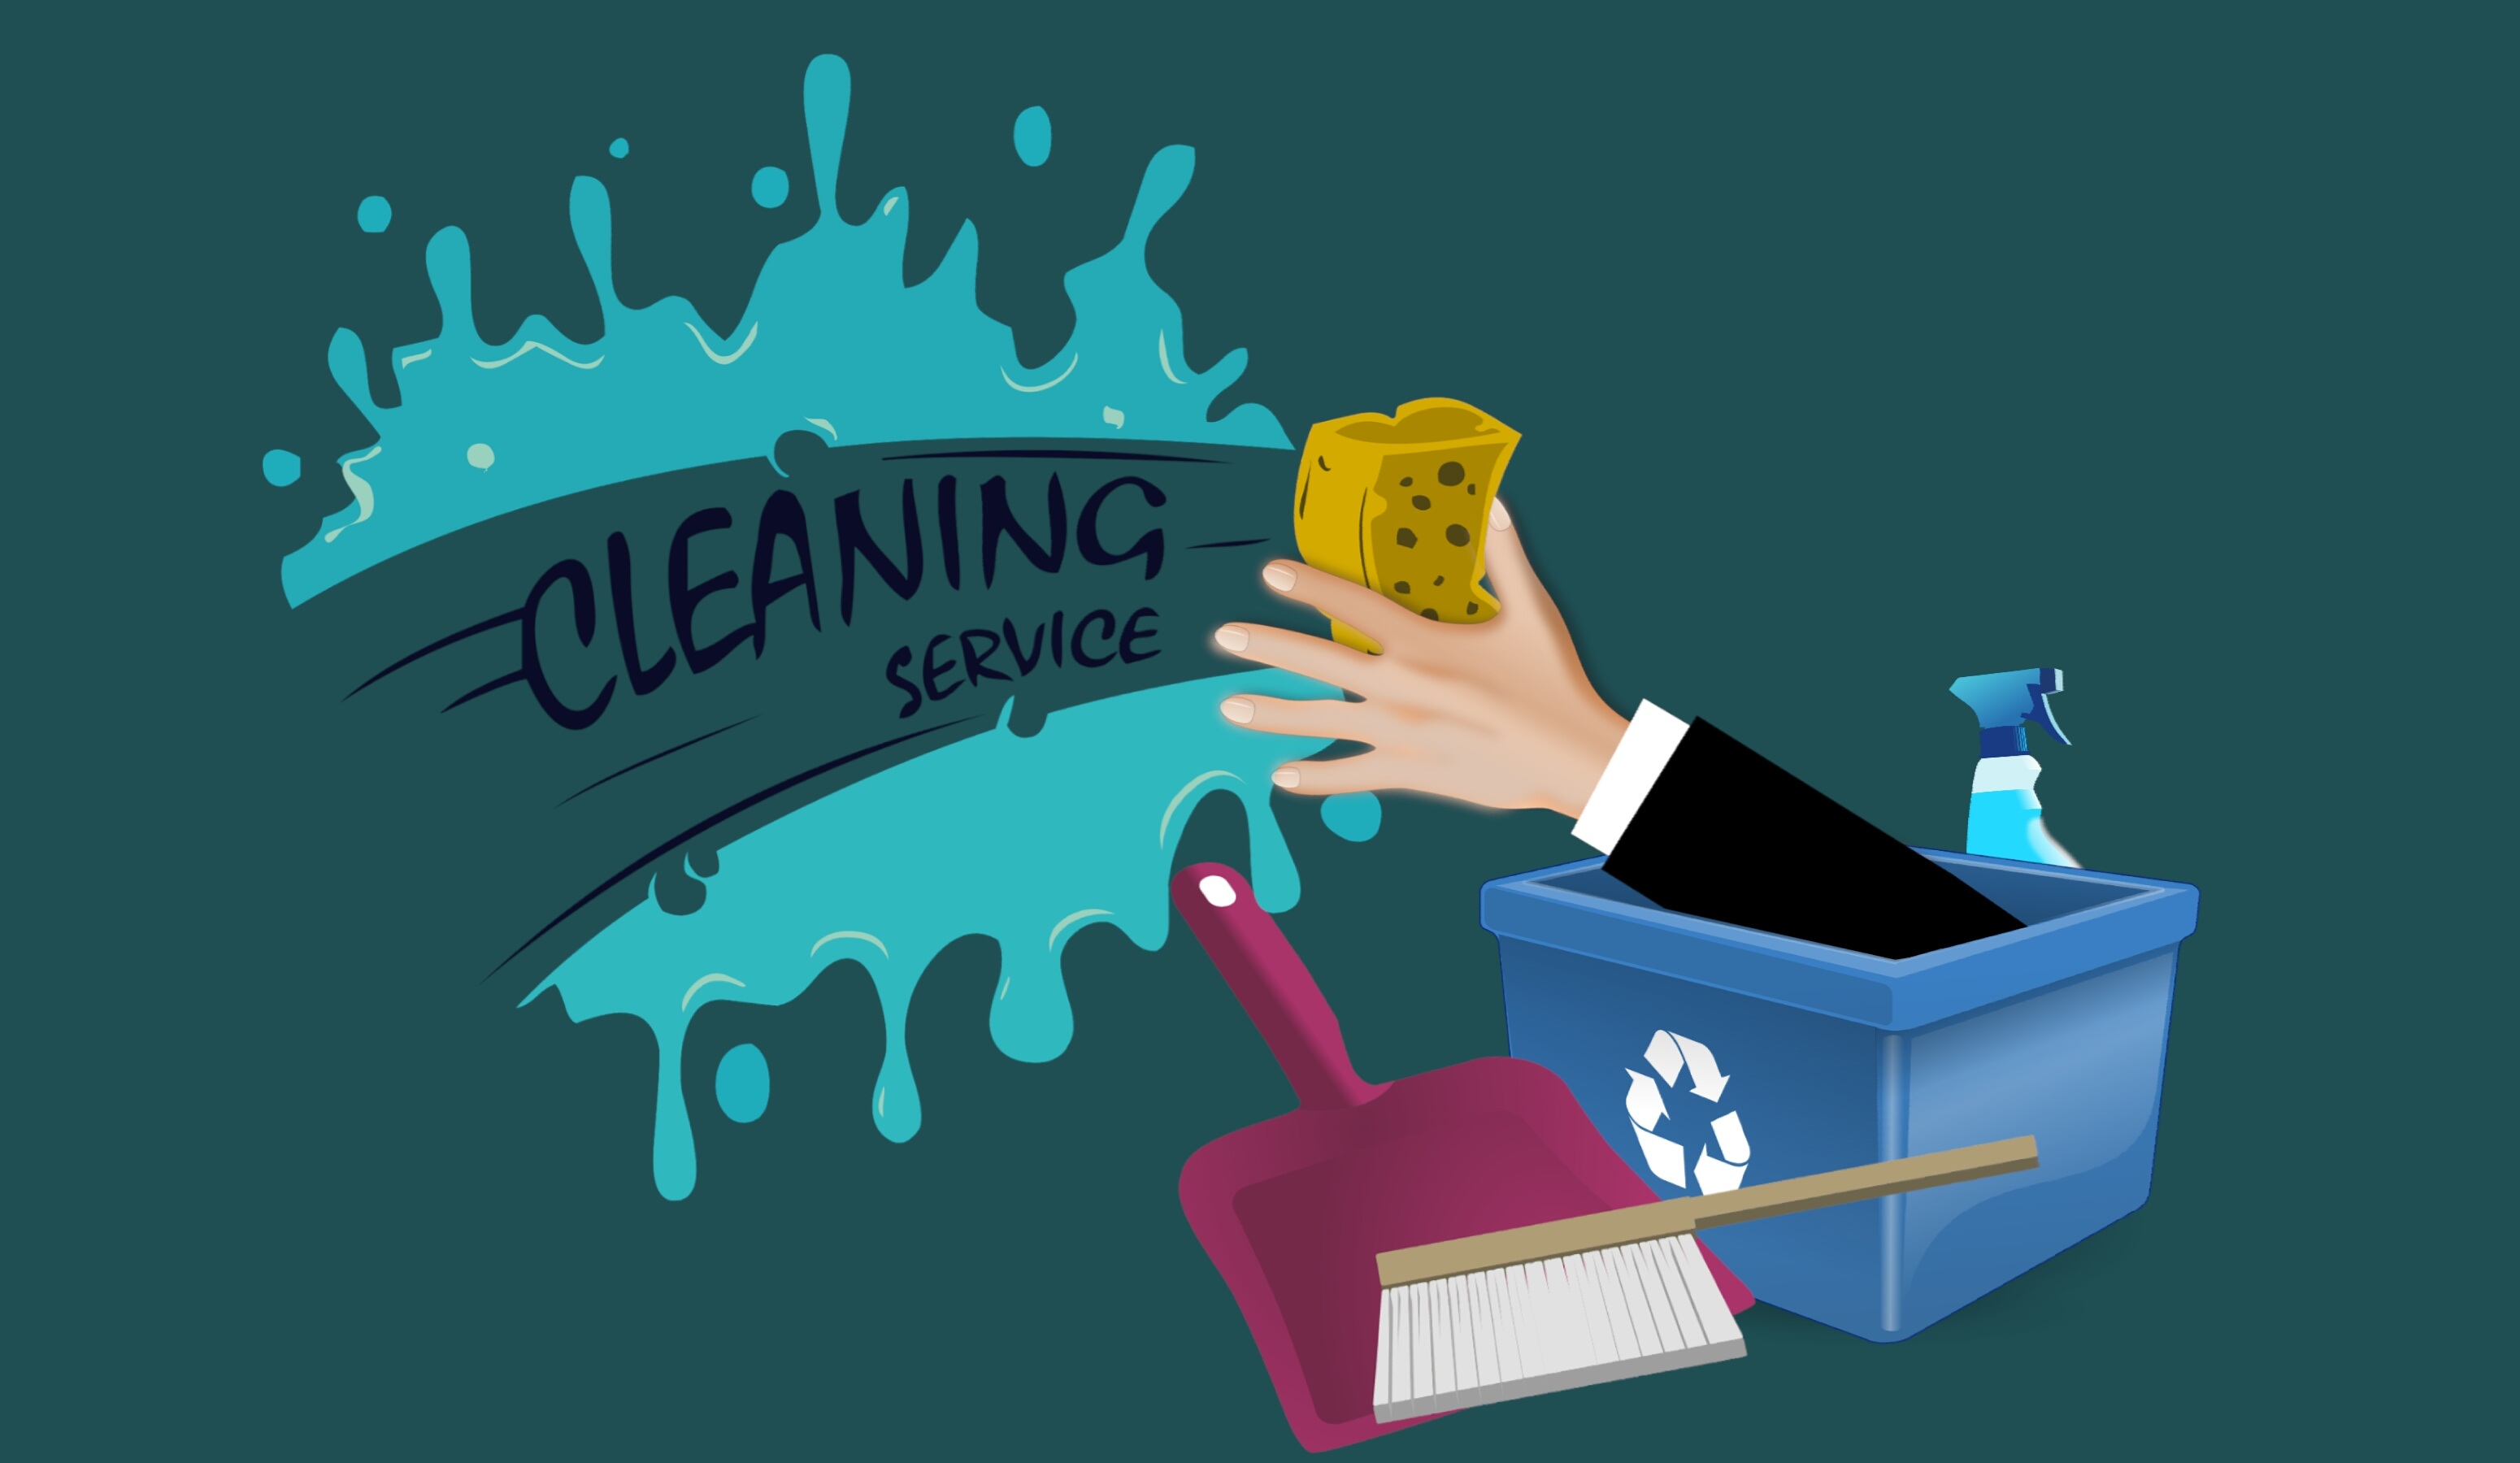 5 Helpful Online Marketing Tips for Cleaning Business Owners